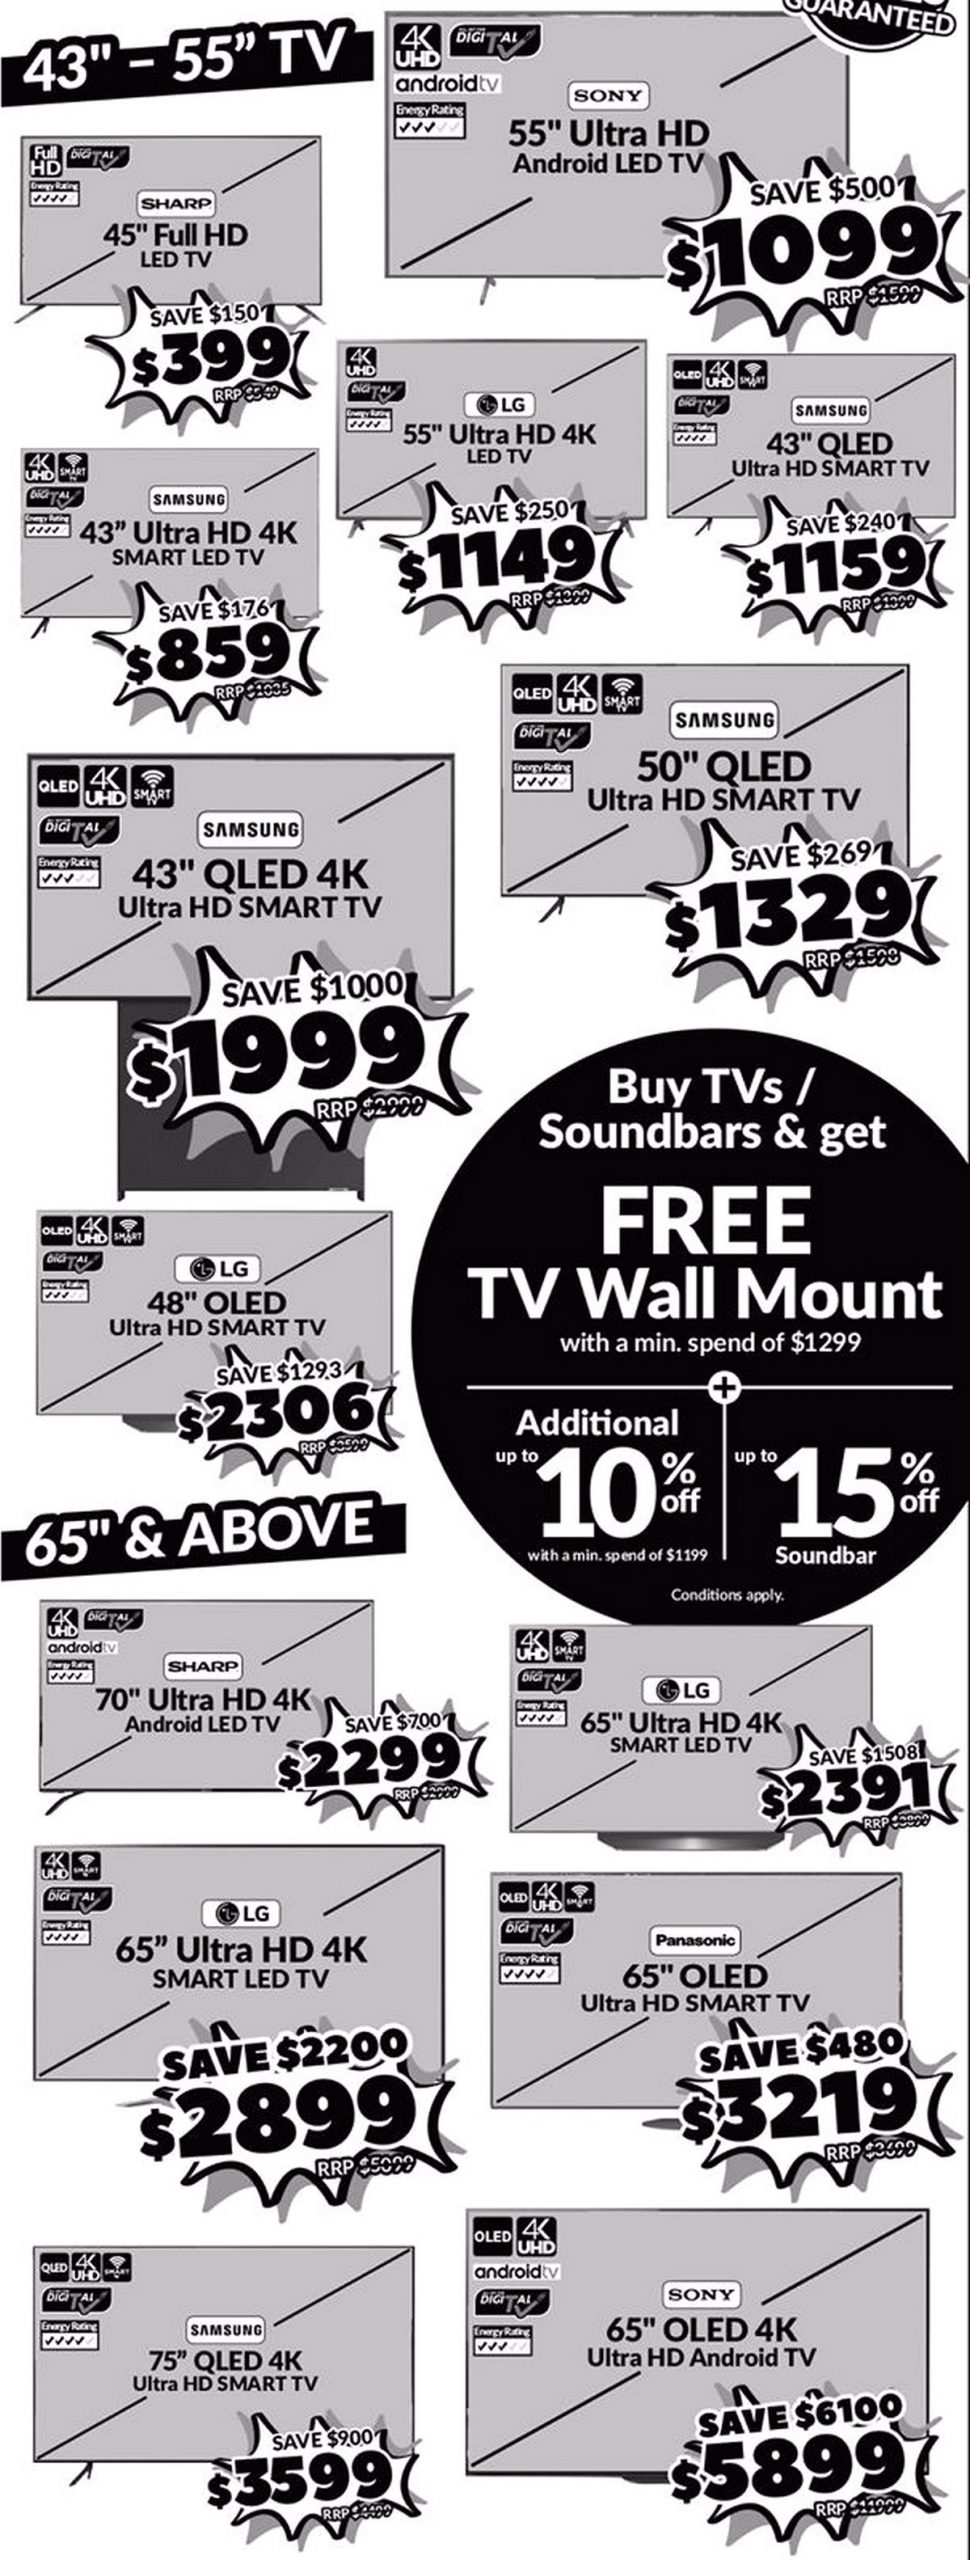 Courts-QLED-UHD-SMART-TV-Clearance-Warehouse-Sale-2021-SIngapore-scaled 13-17 May 2021: COURTS Massive Furniture & TV Clearance Sale! Up to 65% OFF & Buy 1 Free 1 Deals!